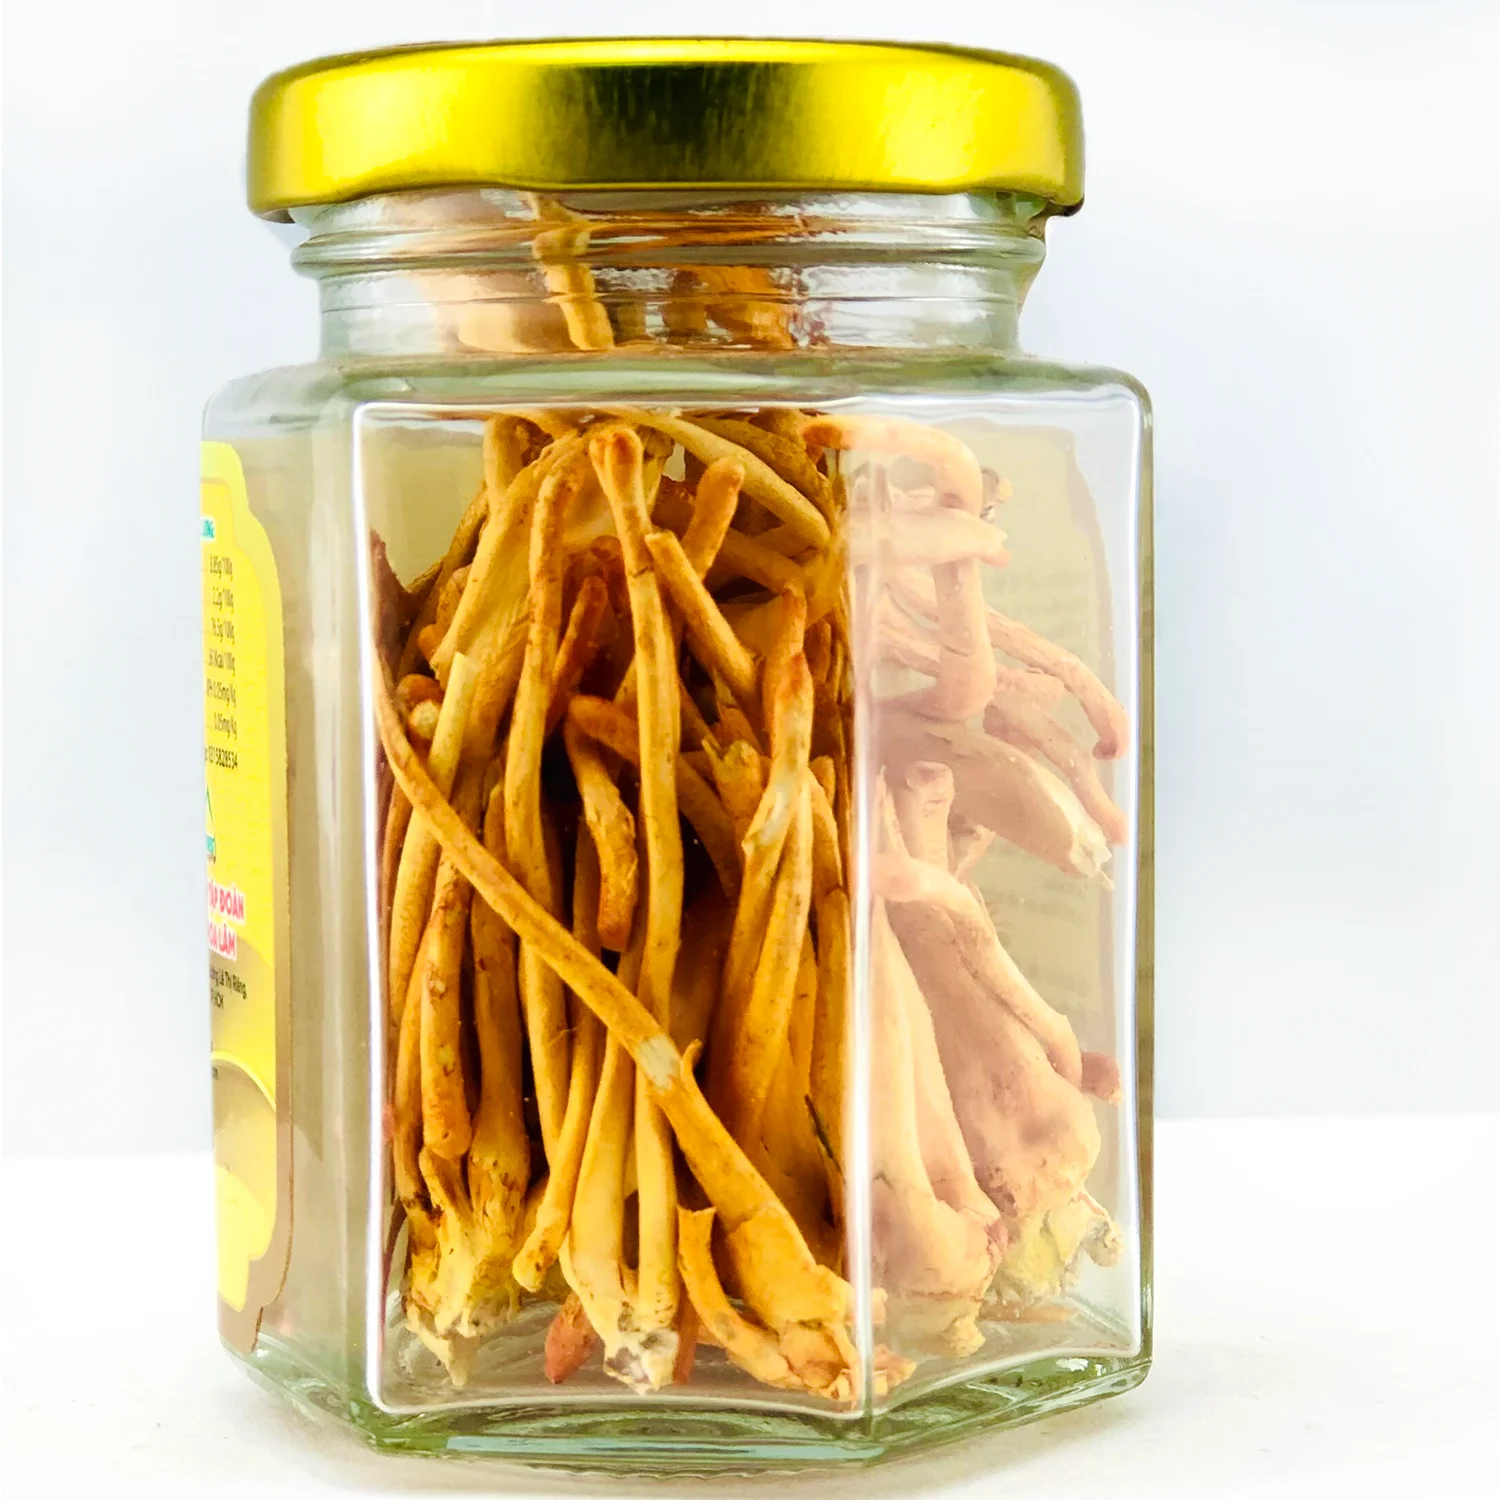 
Cordyceps Healthy Product 100% Natural Herbal High Quality Product Good For Health Providing Energy V-Store Private Label 